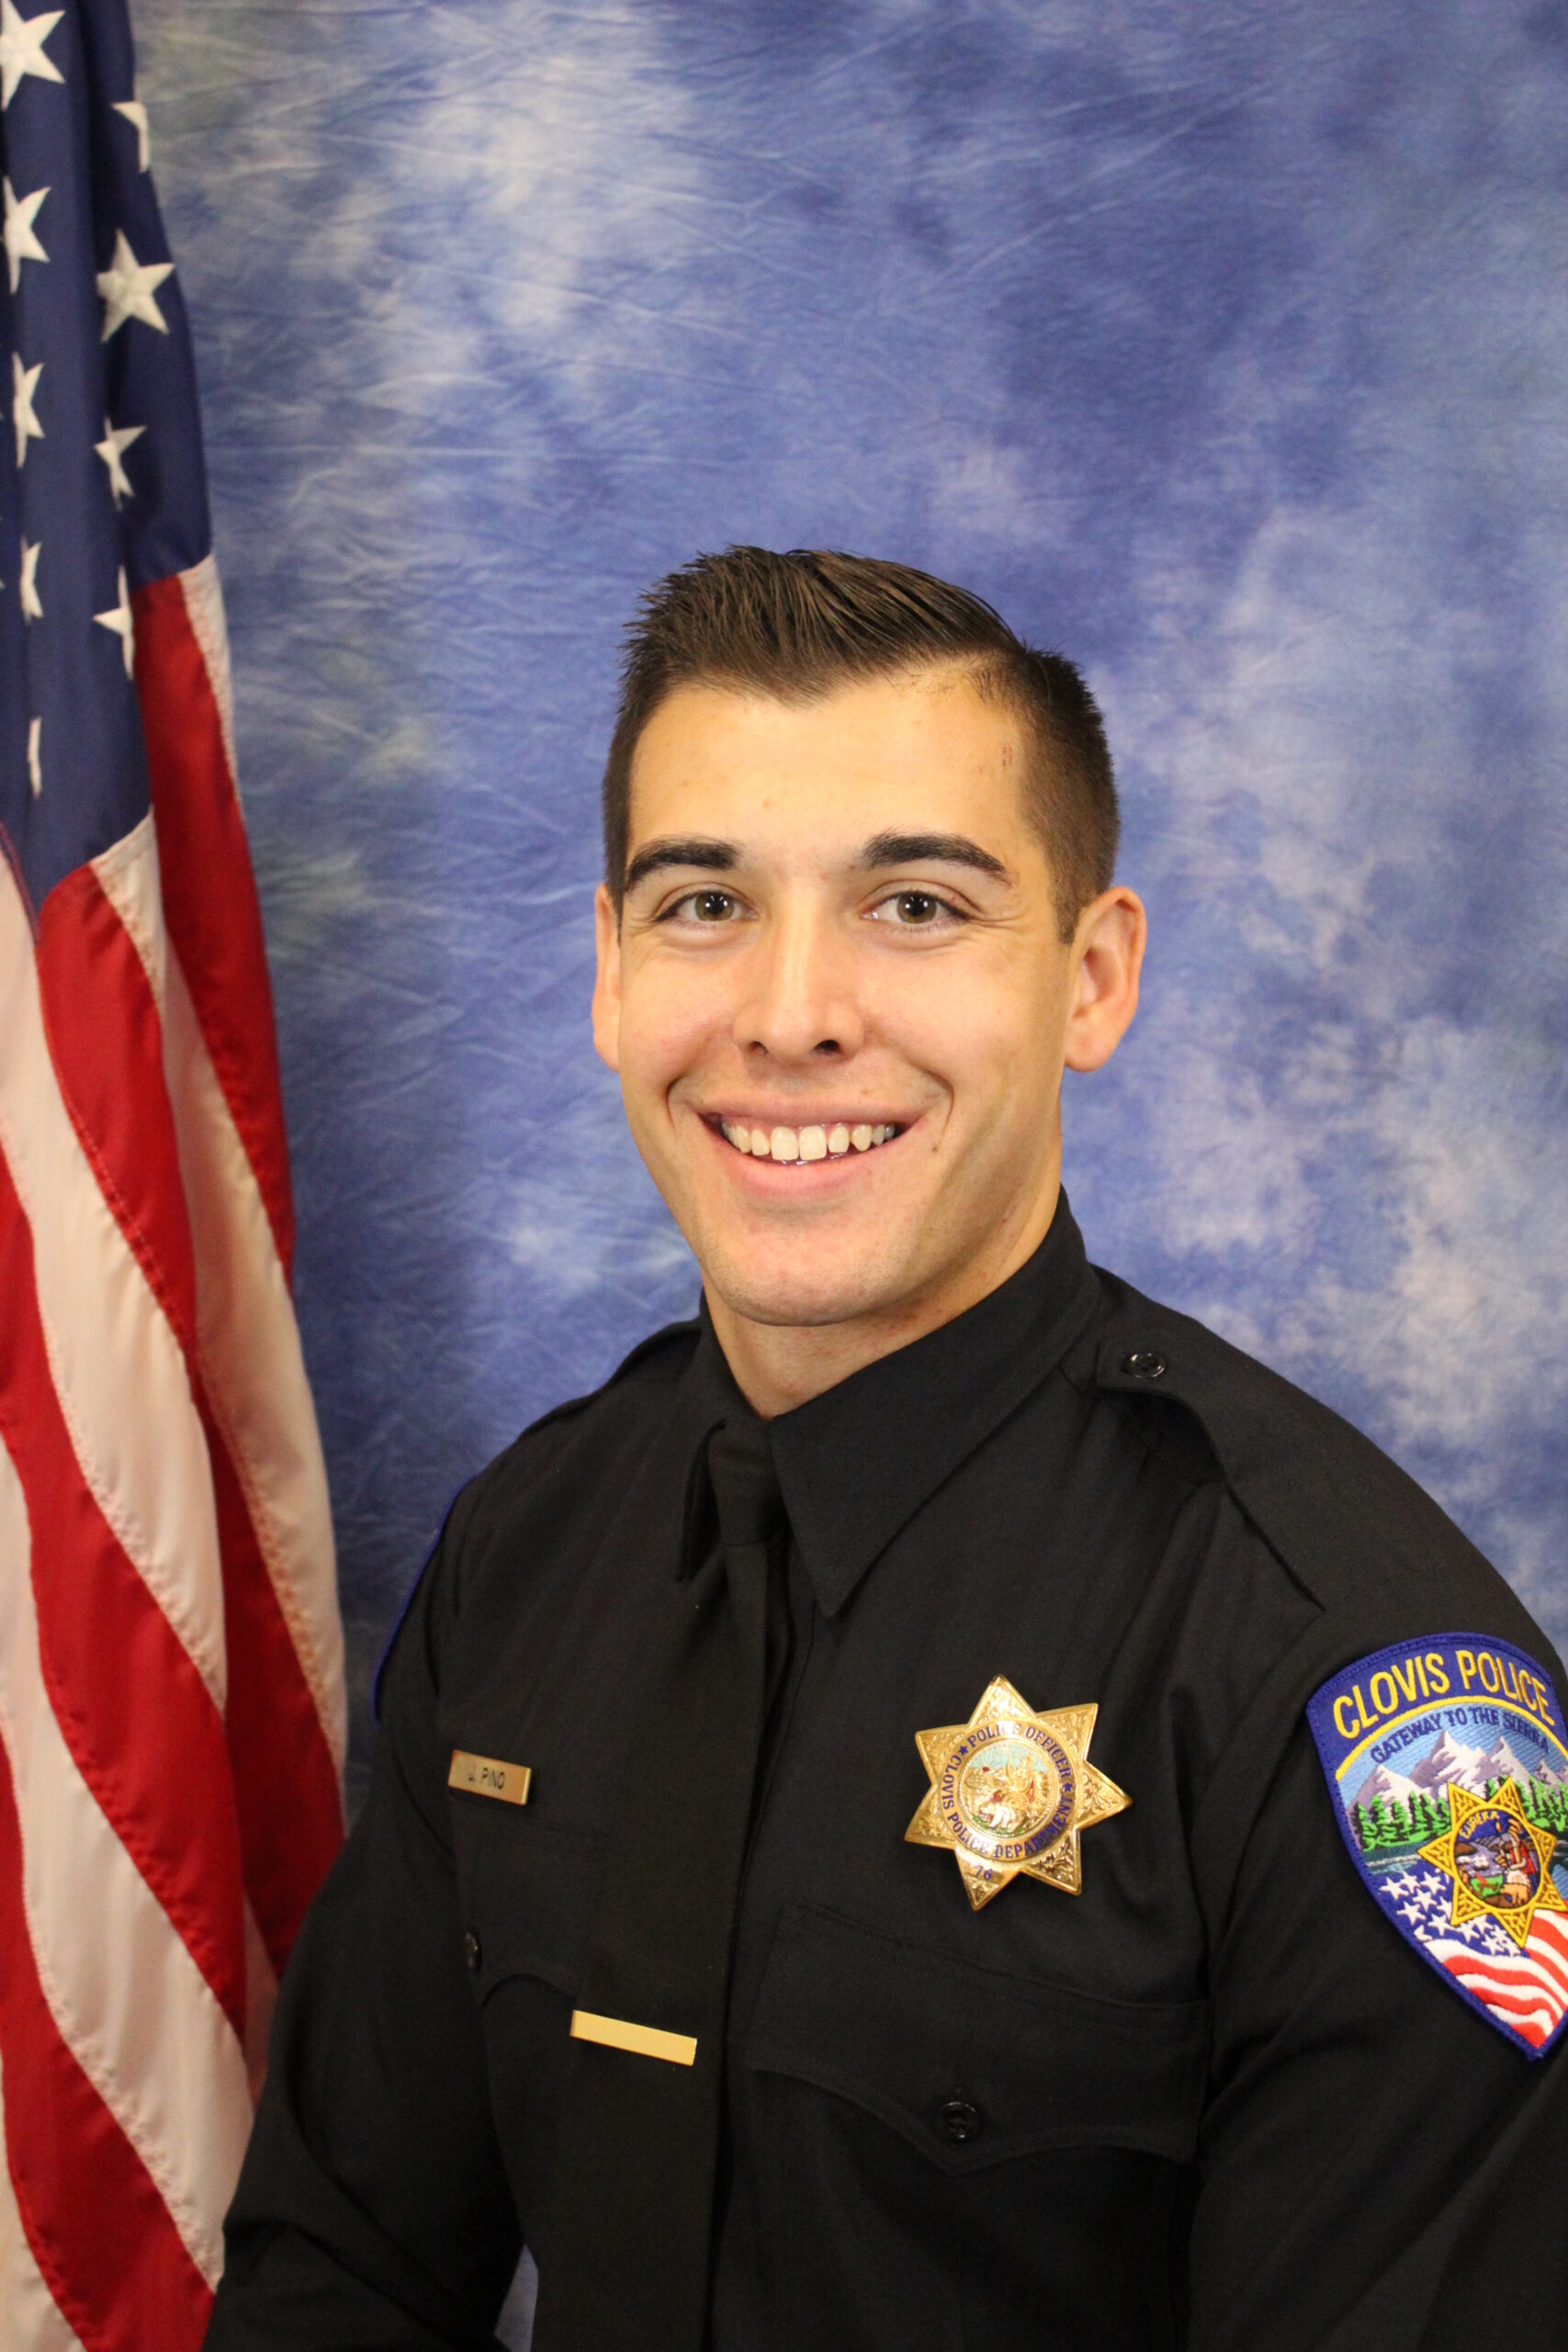 Portrait of Officer Pino.